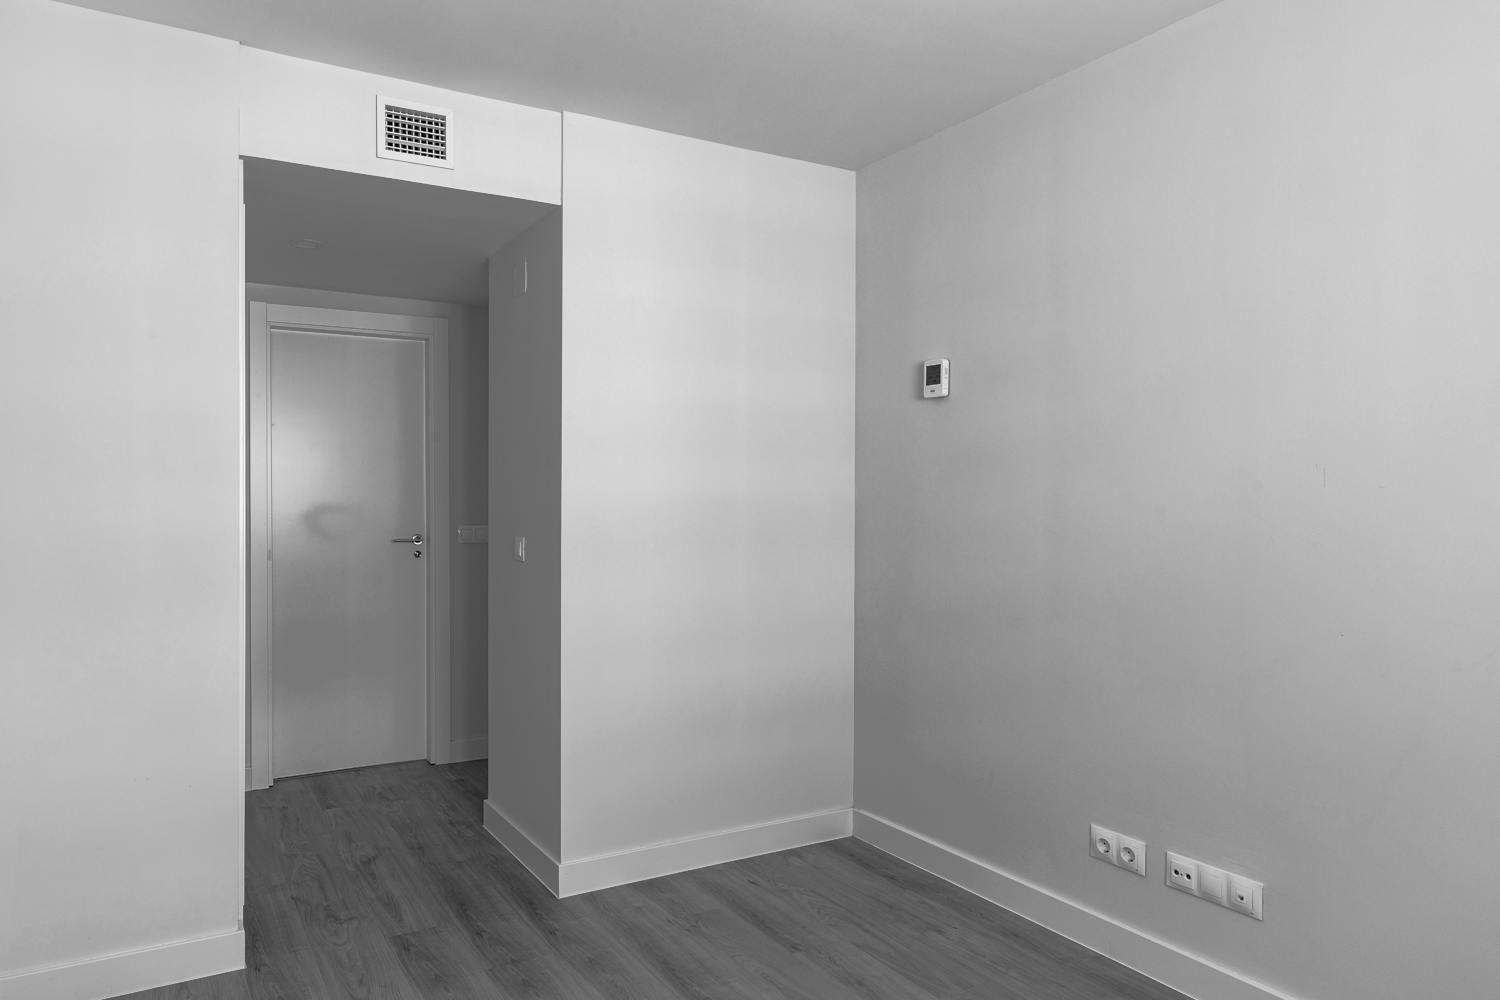 Photo of the bedroom in a flat for rent